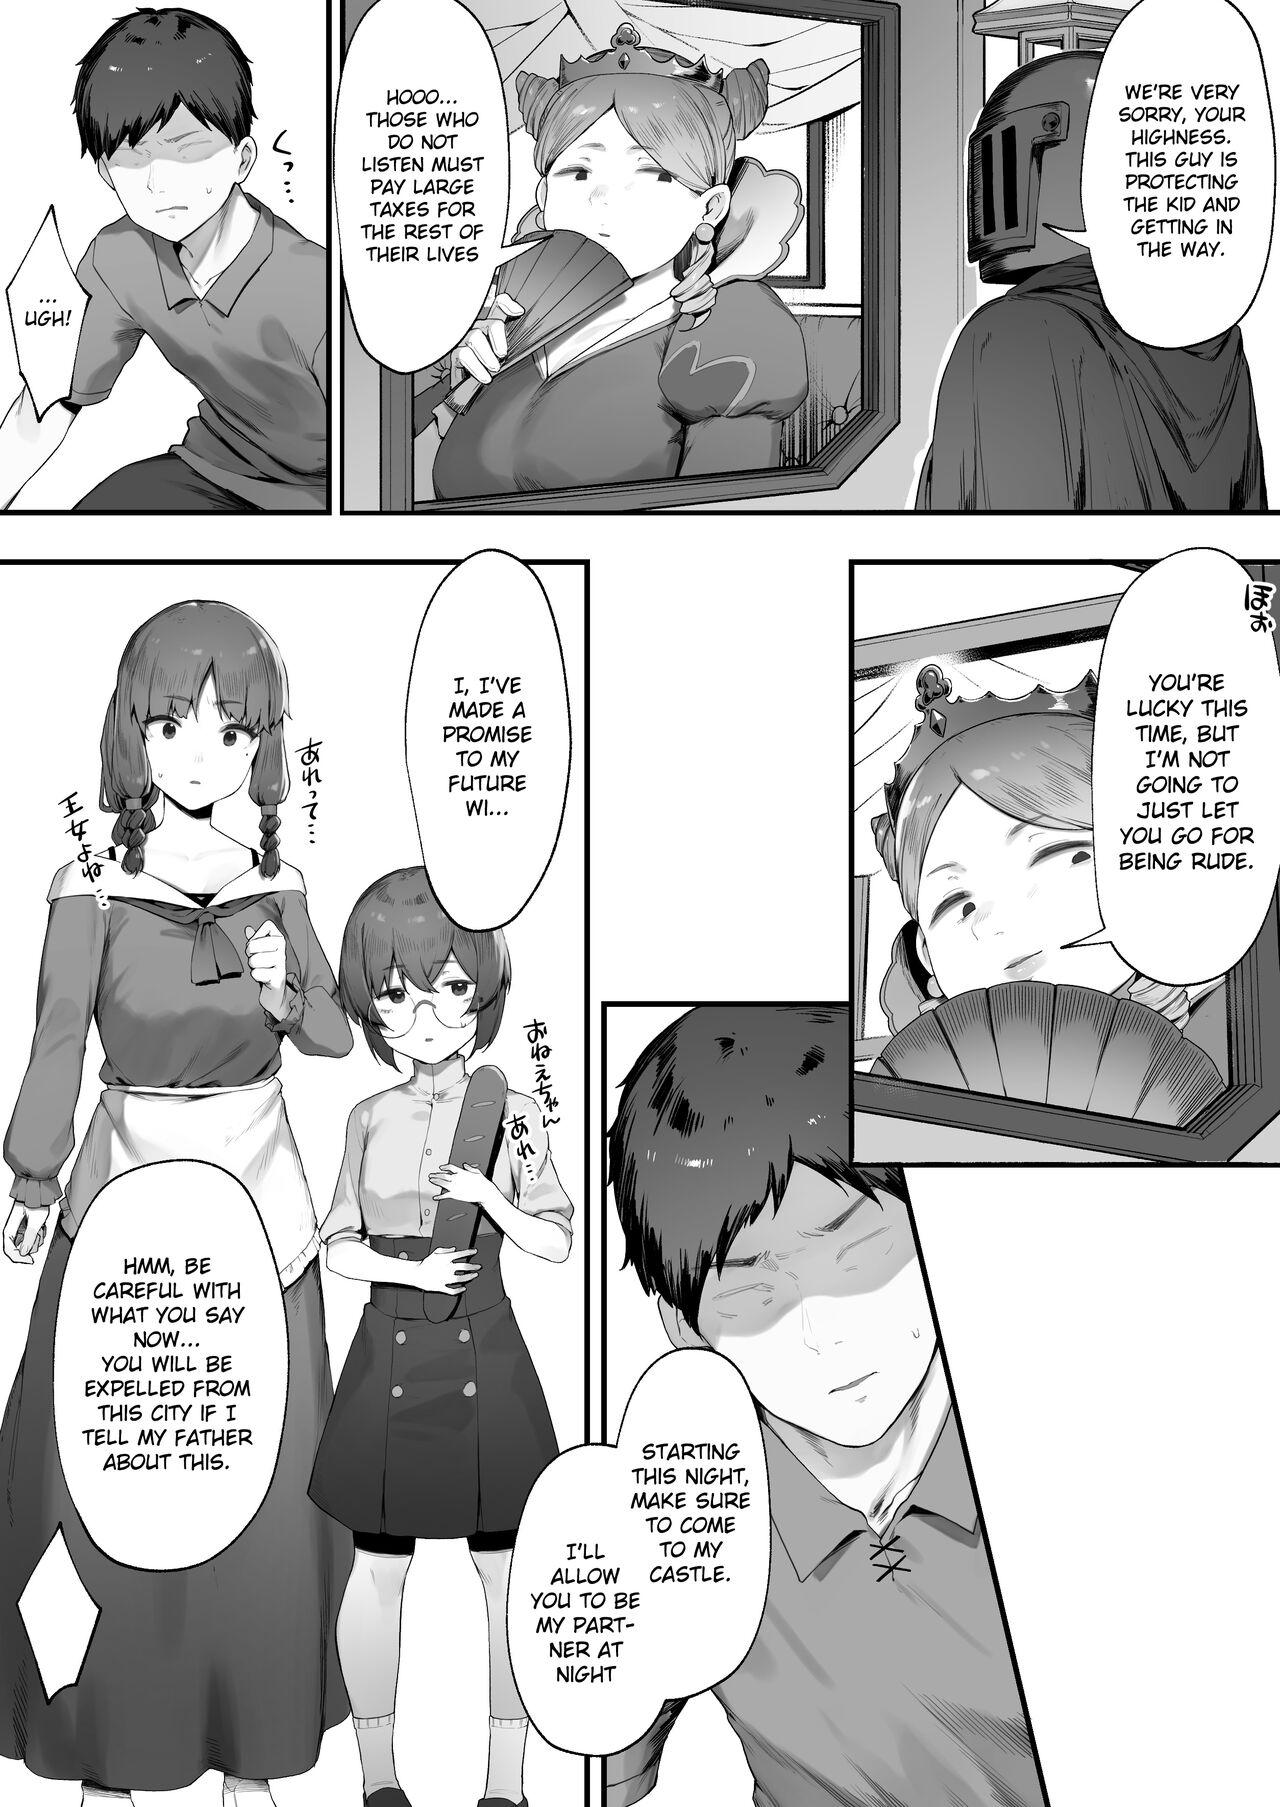 Cougar Oujo no Meirei de Stalker to Kekkon Saserareru Hanashi 1 | A story about being married to a stalker by the order of a princess 1 - Original Flaquita - Page 5